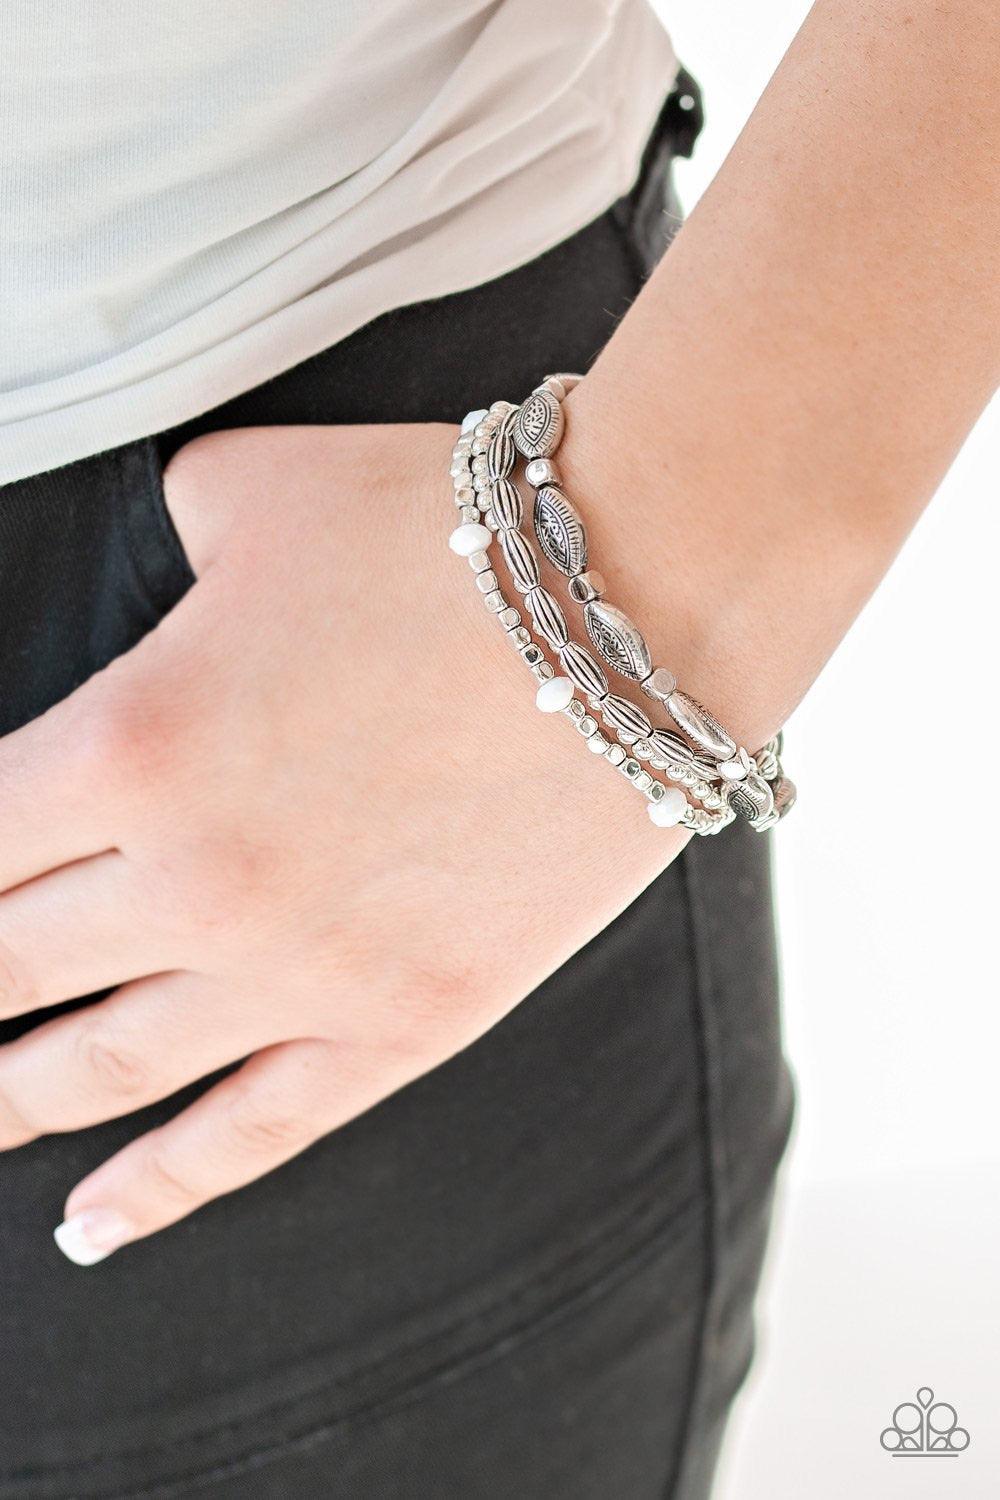 Paparazzi Accessories Full of Wander - White Infused with faceted white beads, a collection of mismatched silver beads are threaded along stretchy bands, creating colorful layers across the wrist. Jewelry